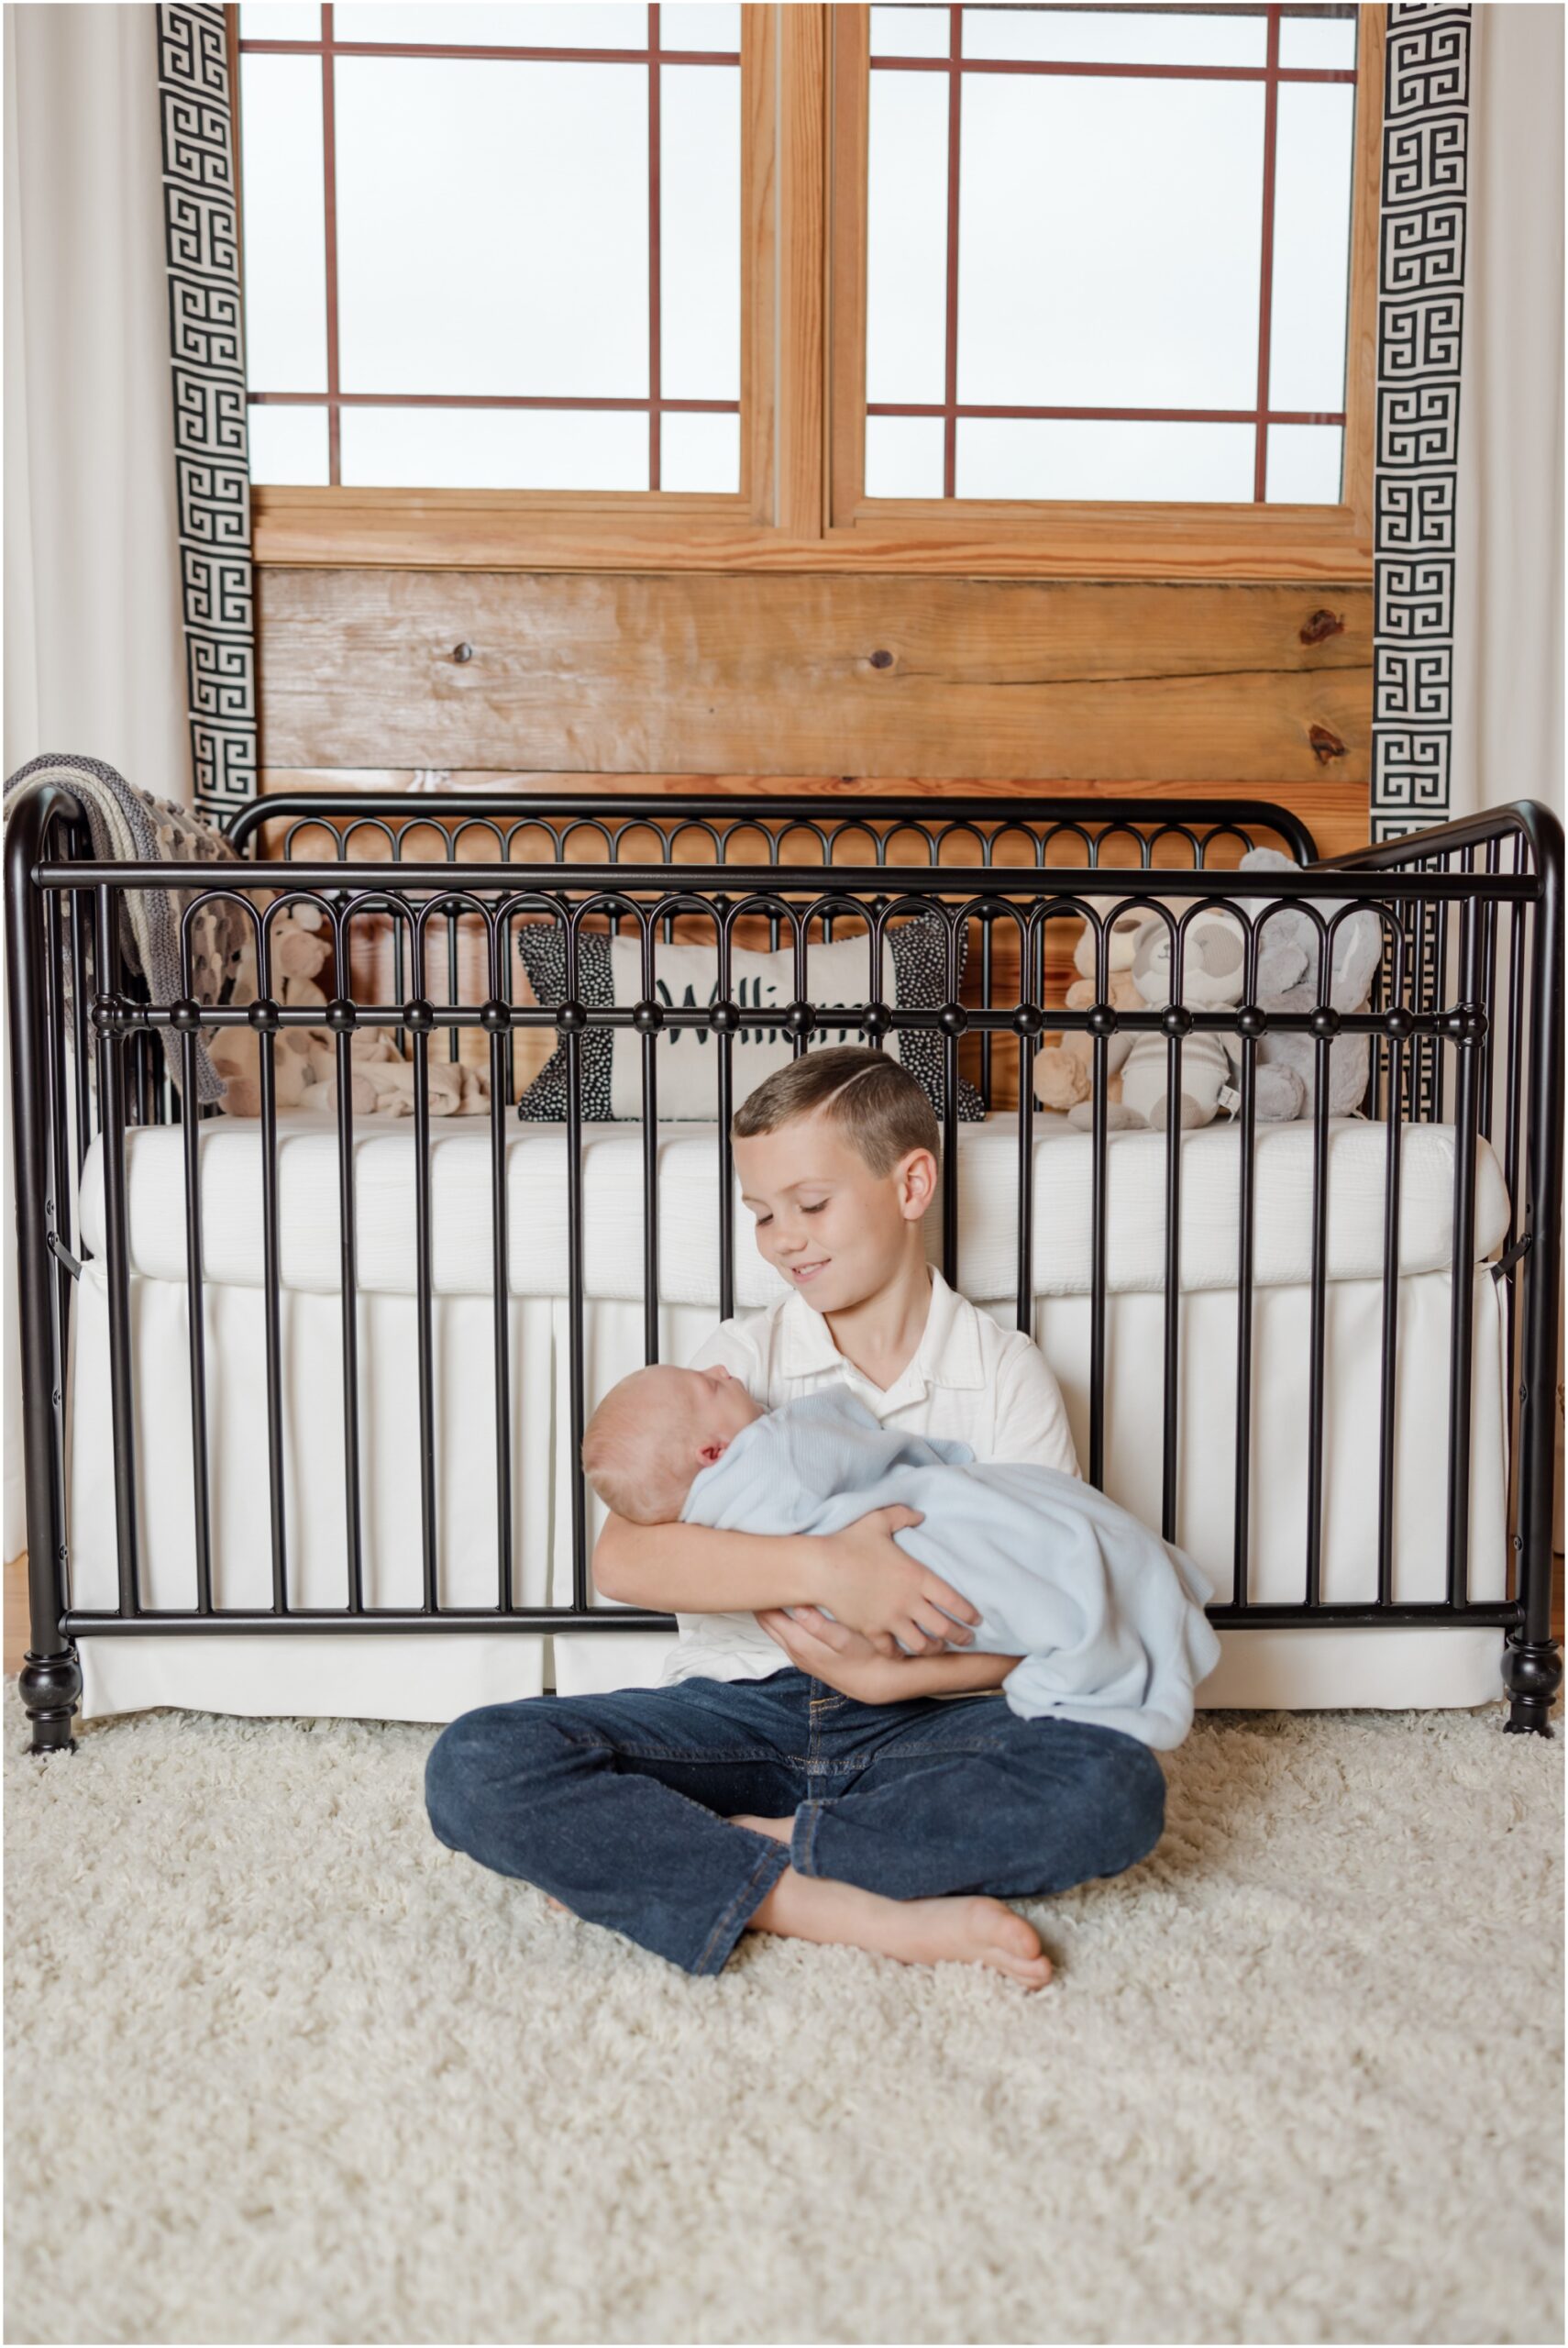 A young boy sits on a shag rug holding his newborn baby brother in front of a black and white cabin nursery during a Greenville SC newborn photography session.